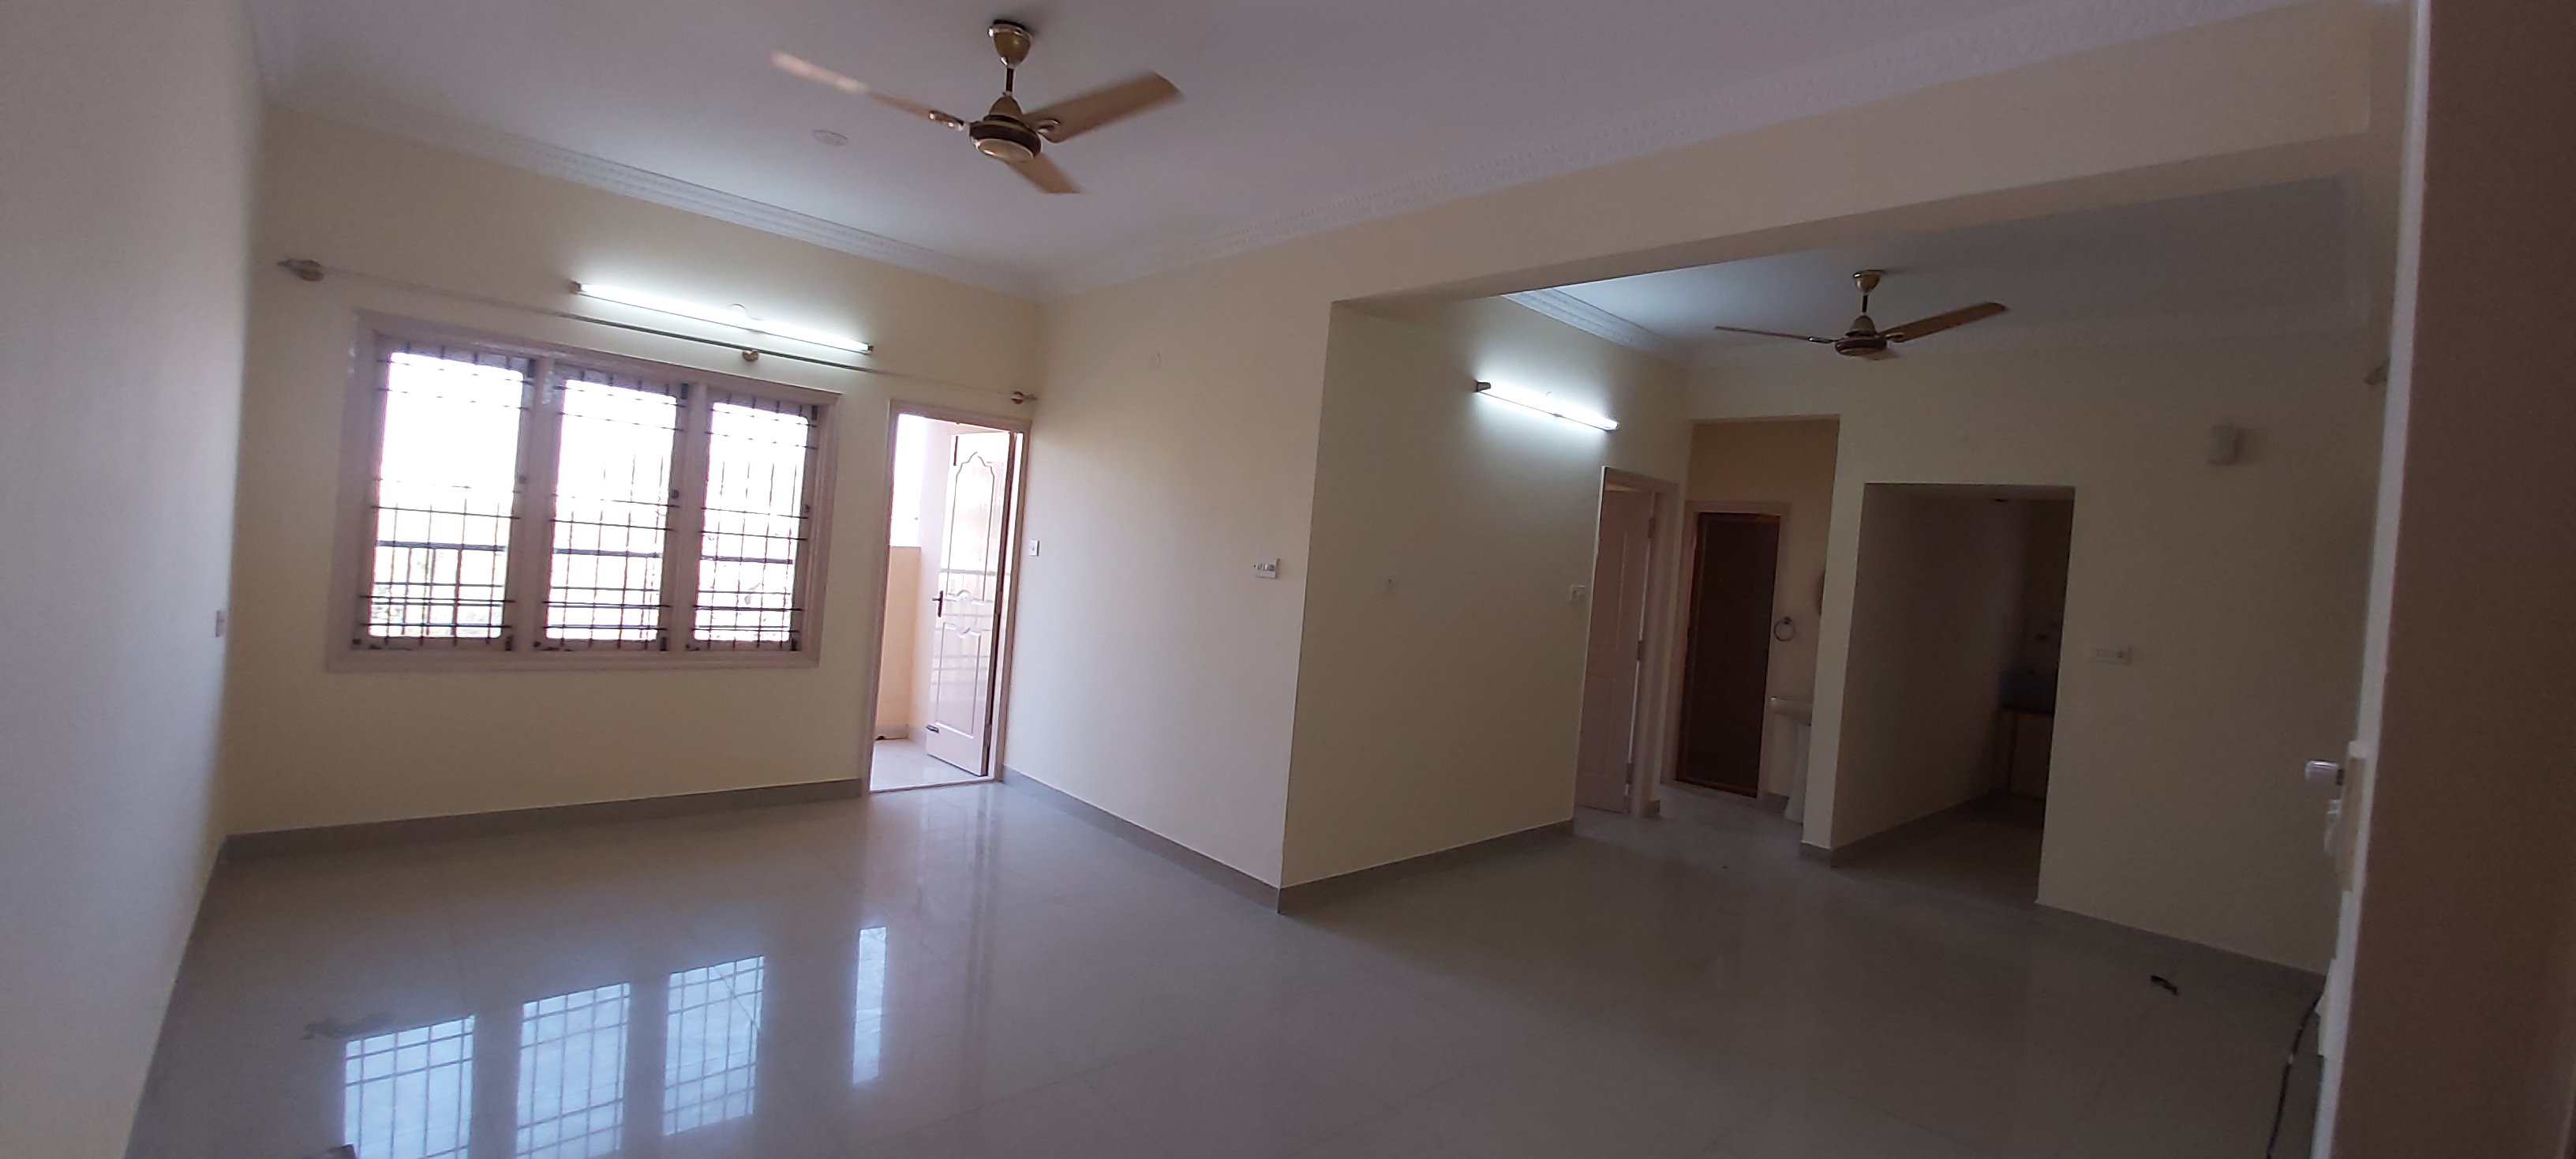 New Apartments For Rent In Sulekha for Simple Design